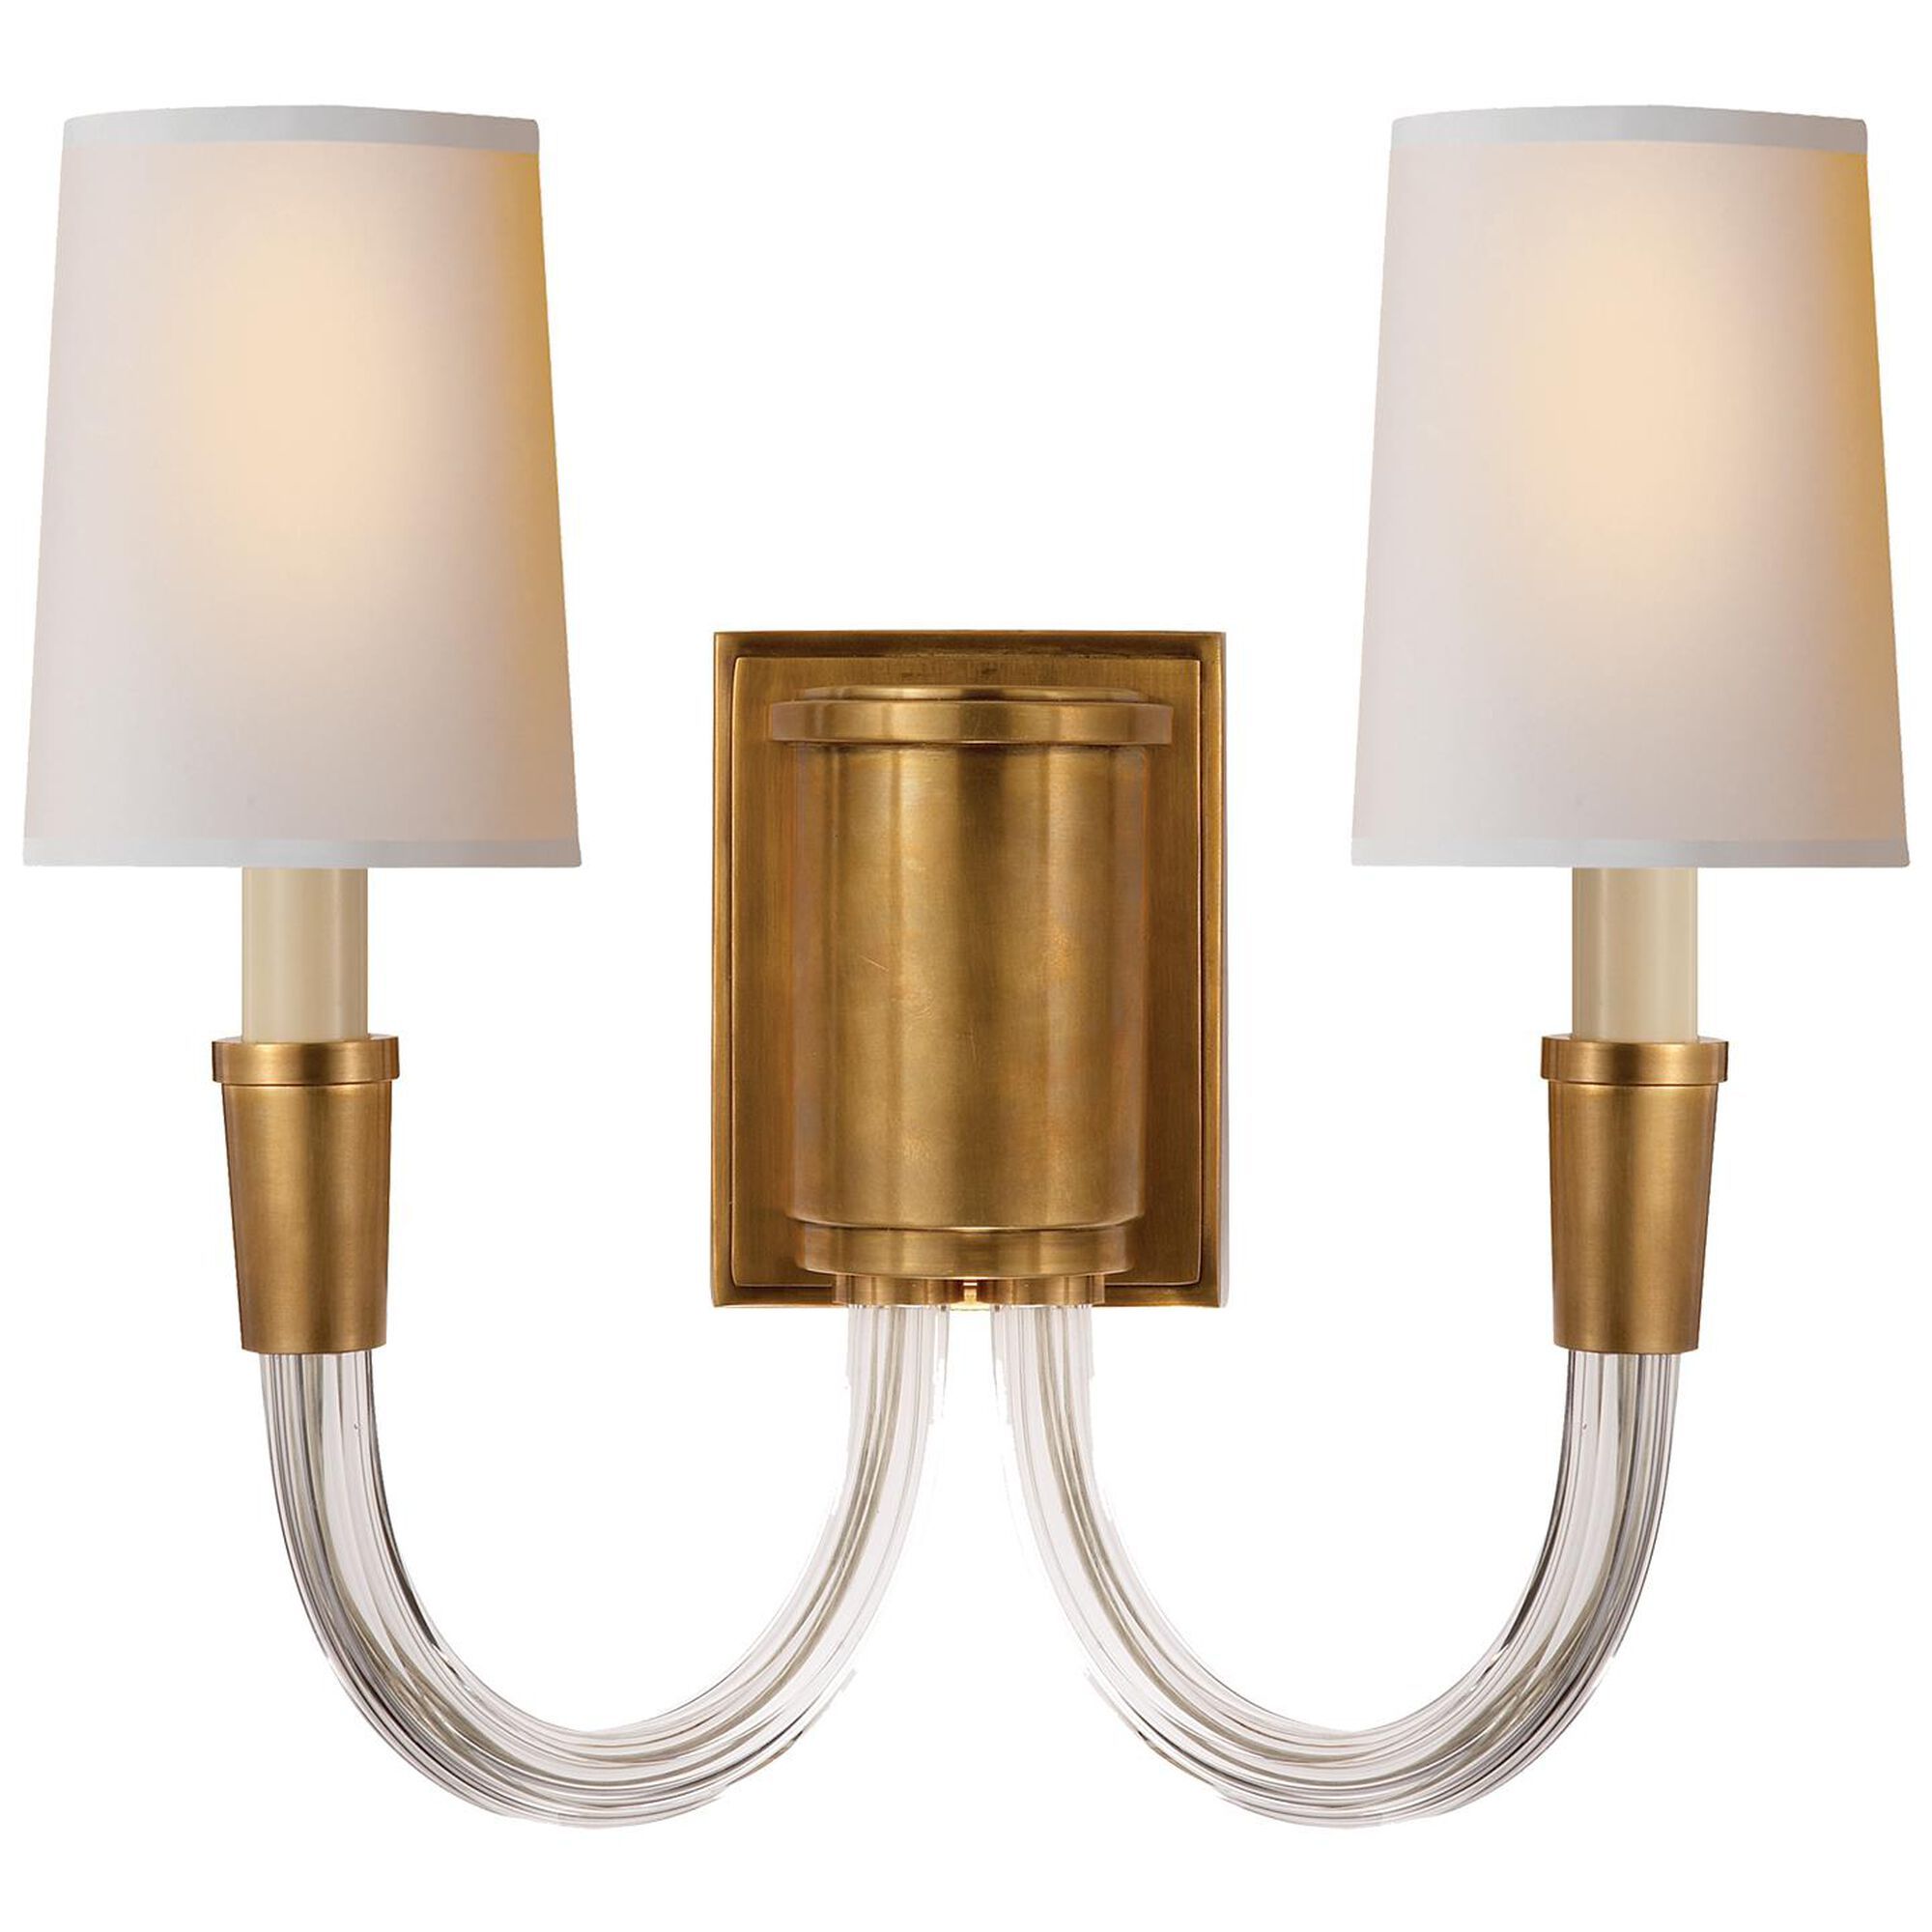 Thomas O'Brien Vivian 13 Inch Wall Sconce by Visual Comfort and Co. | Capitol Lighting 1800lighting.com